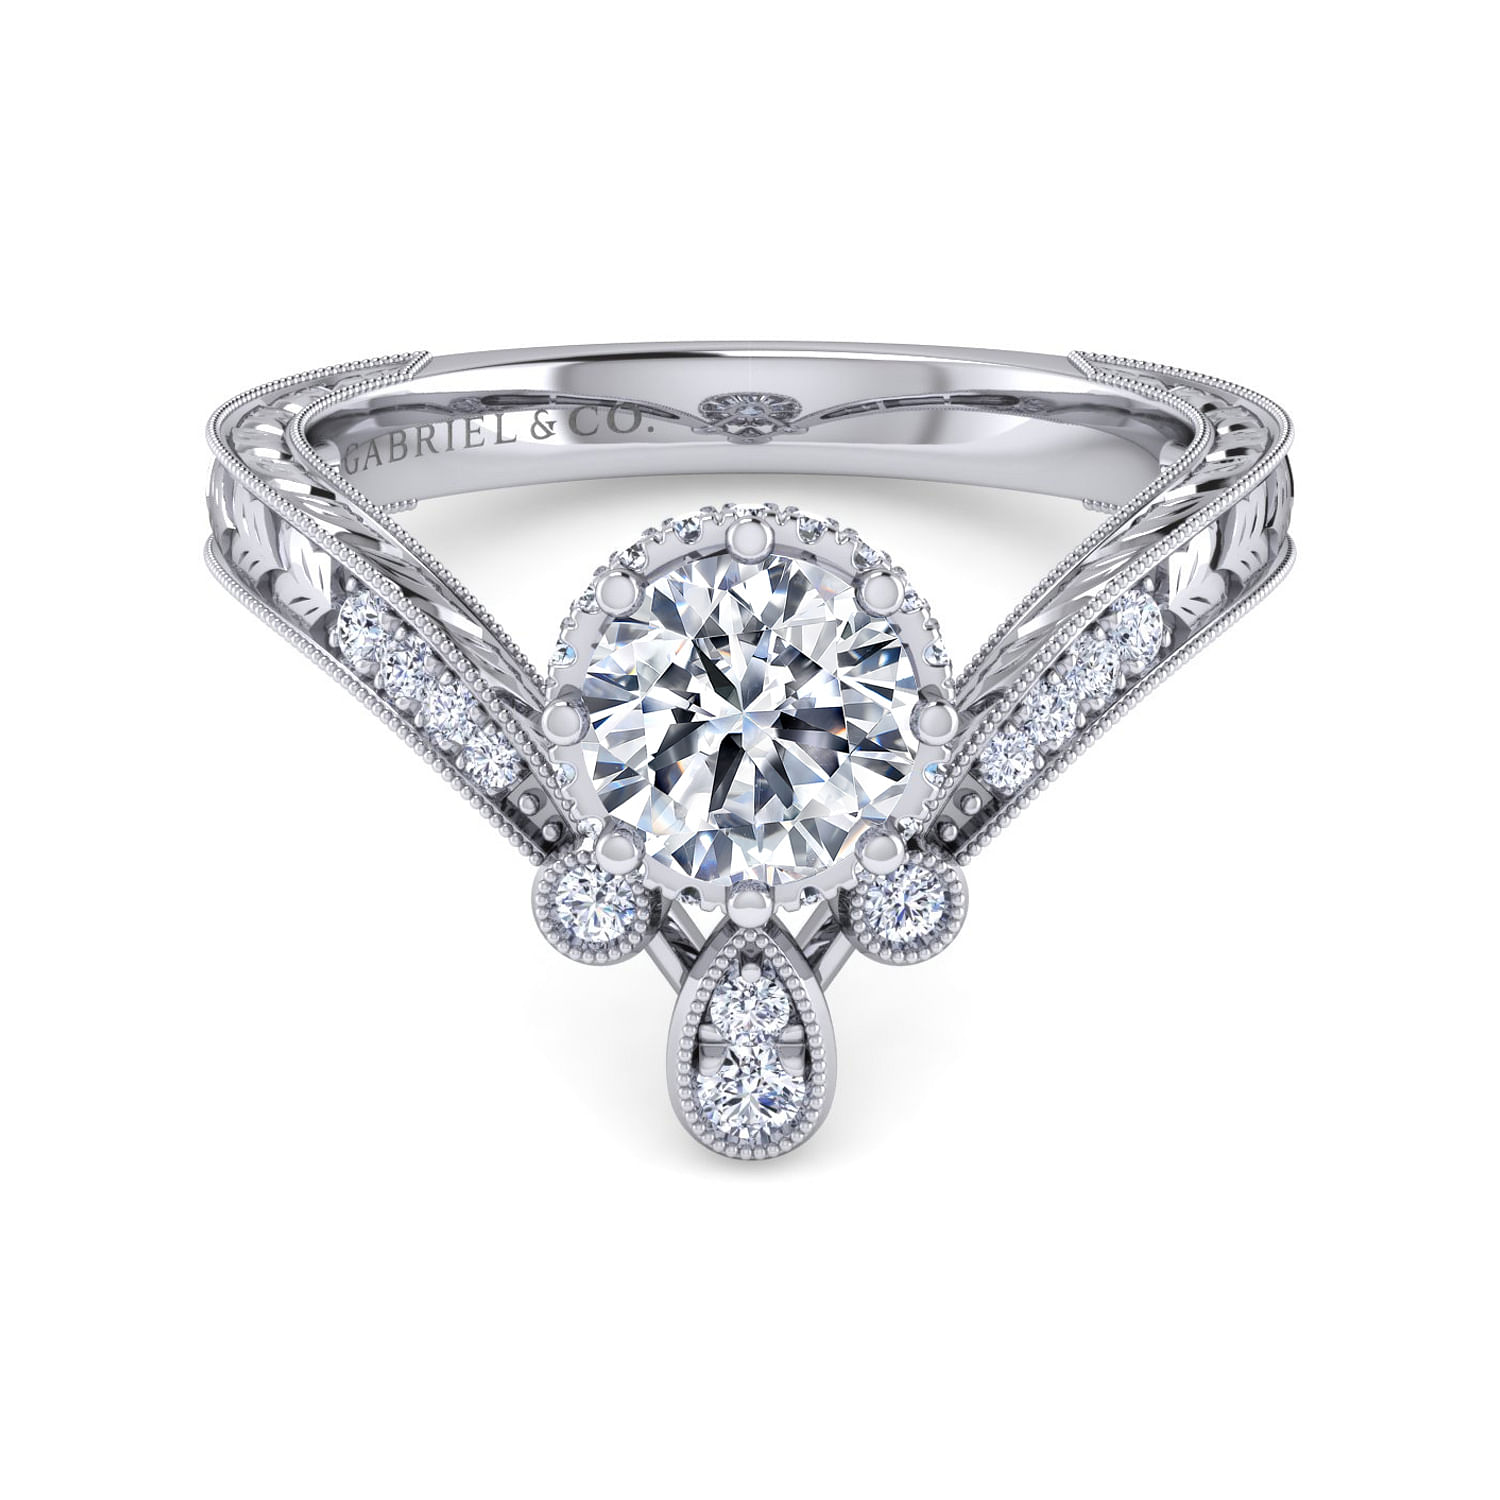 Vintage Inspired 14K White Gold Curved Round Diamond Engagement Ring